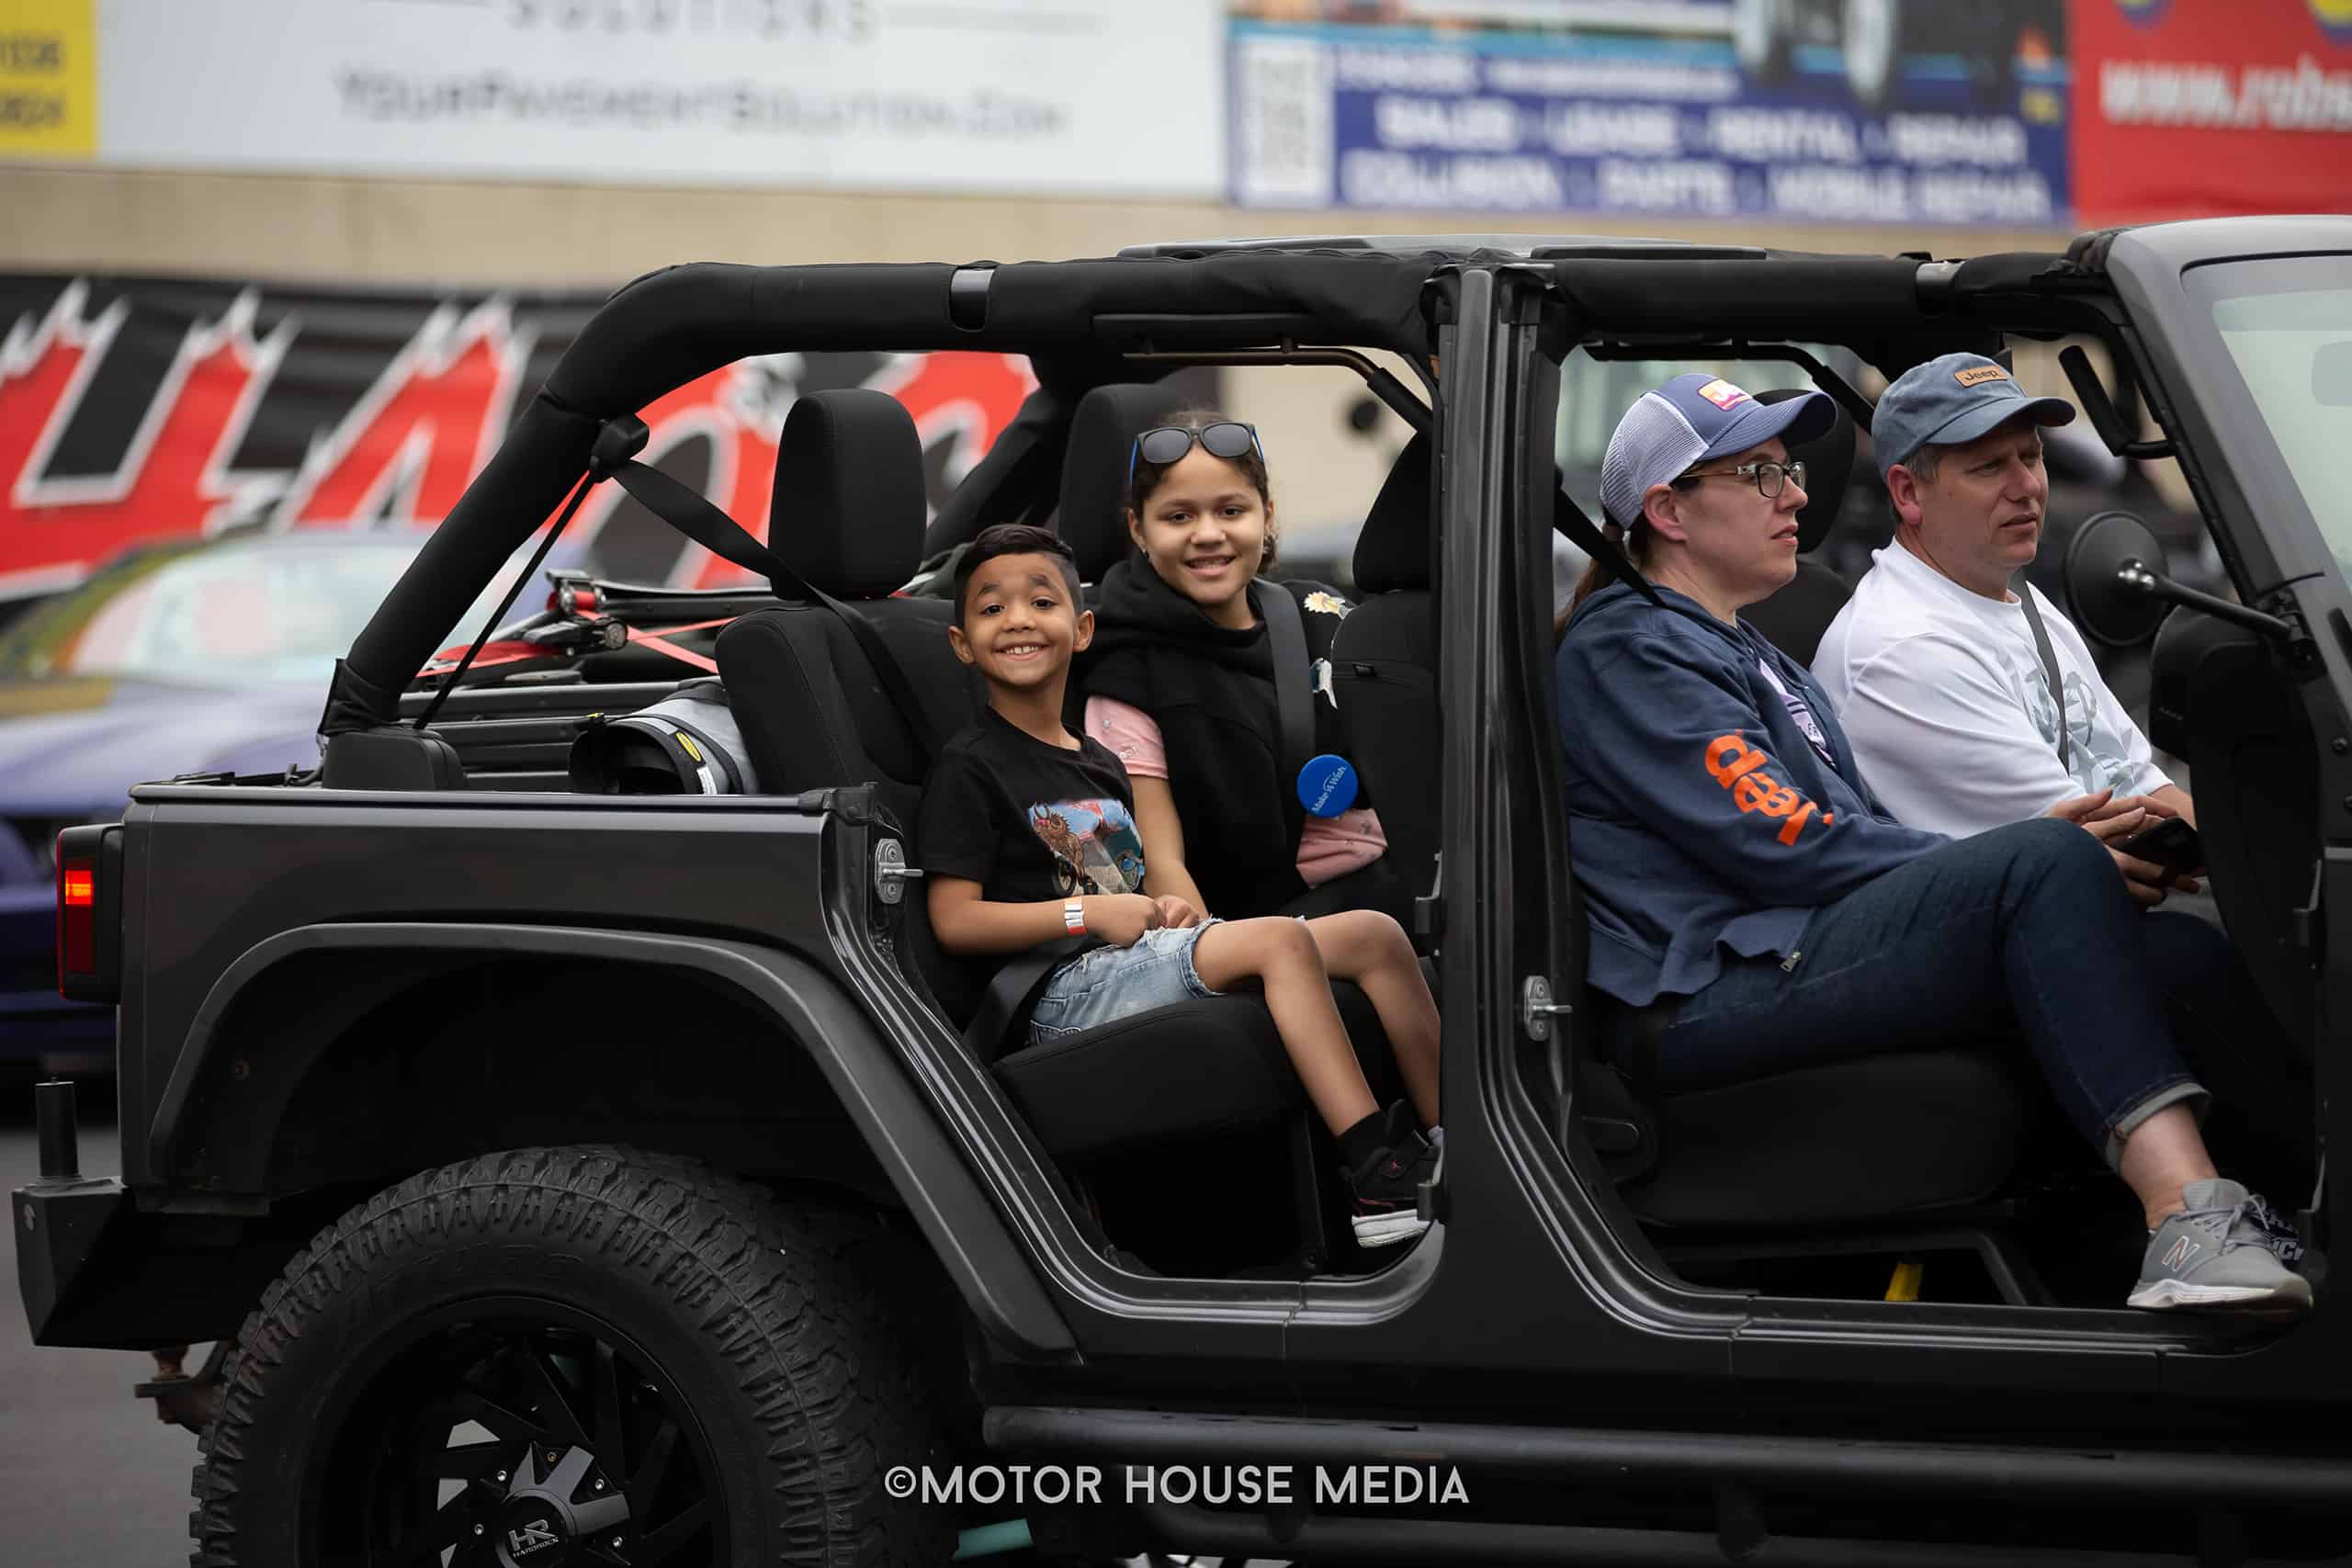 The Make a Wish parade at The Turn 5 auto show featuring Cars, trucks & Jeeps